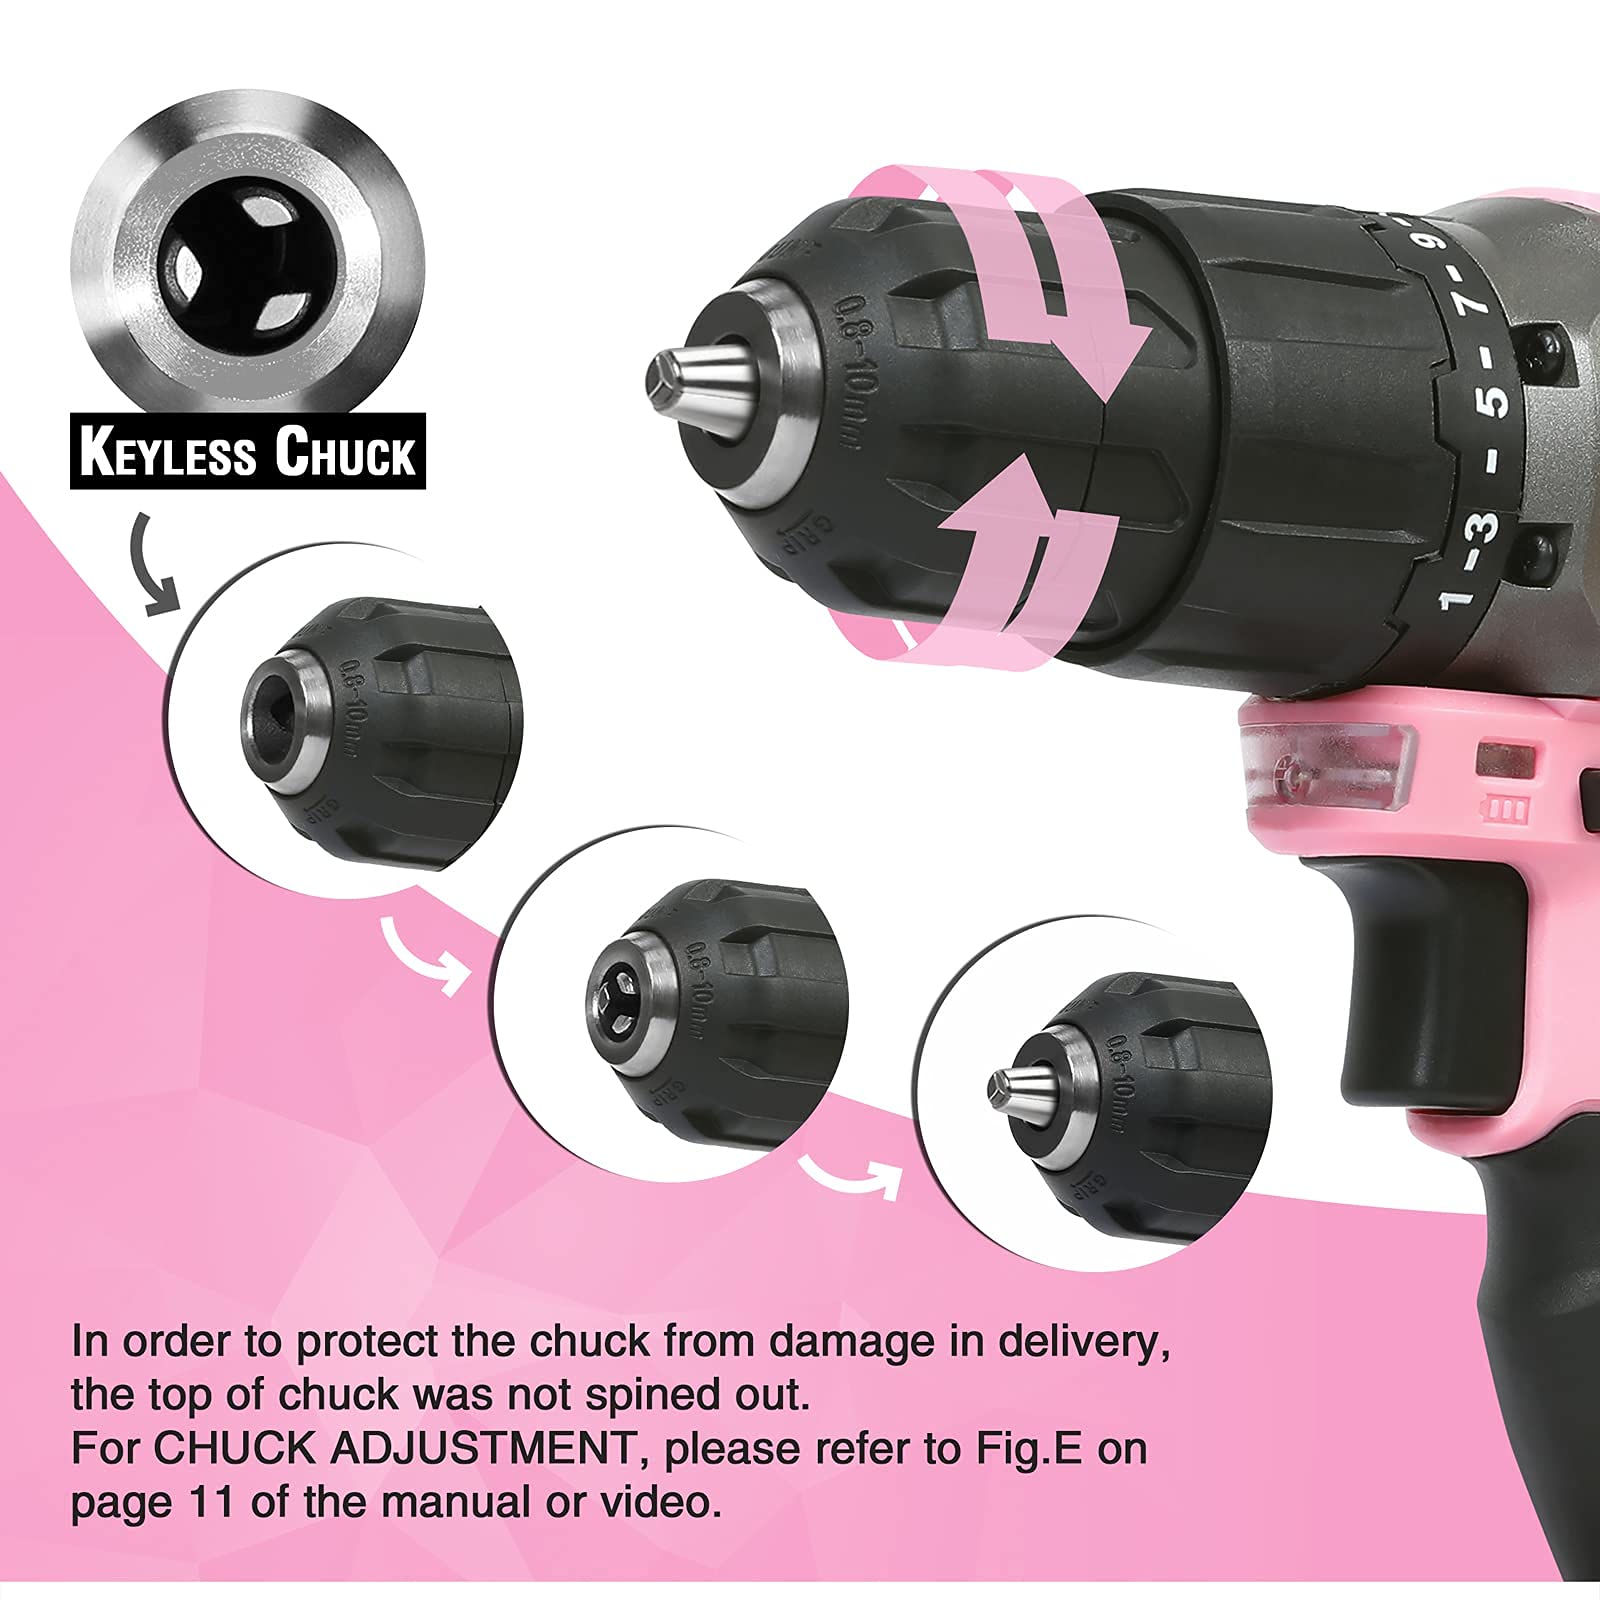 WORKPRO Pink Cordless 20V Lithium-ion Drill Driver Set & 8 Piece Magnetic Screwdrivers Set- Pink Ribbon